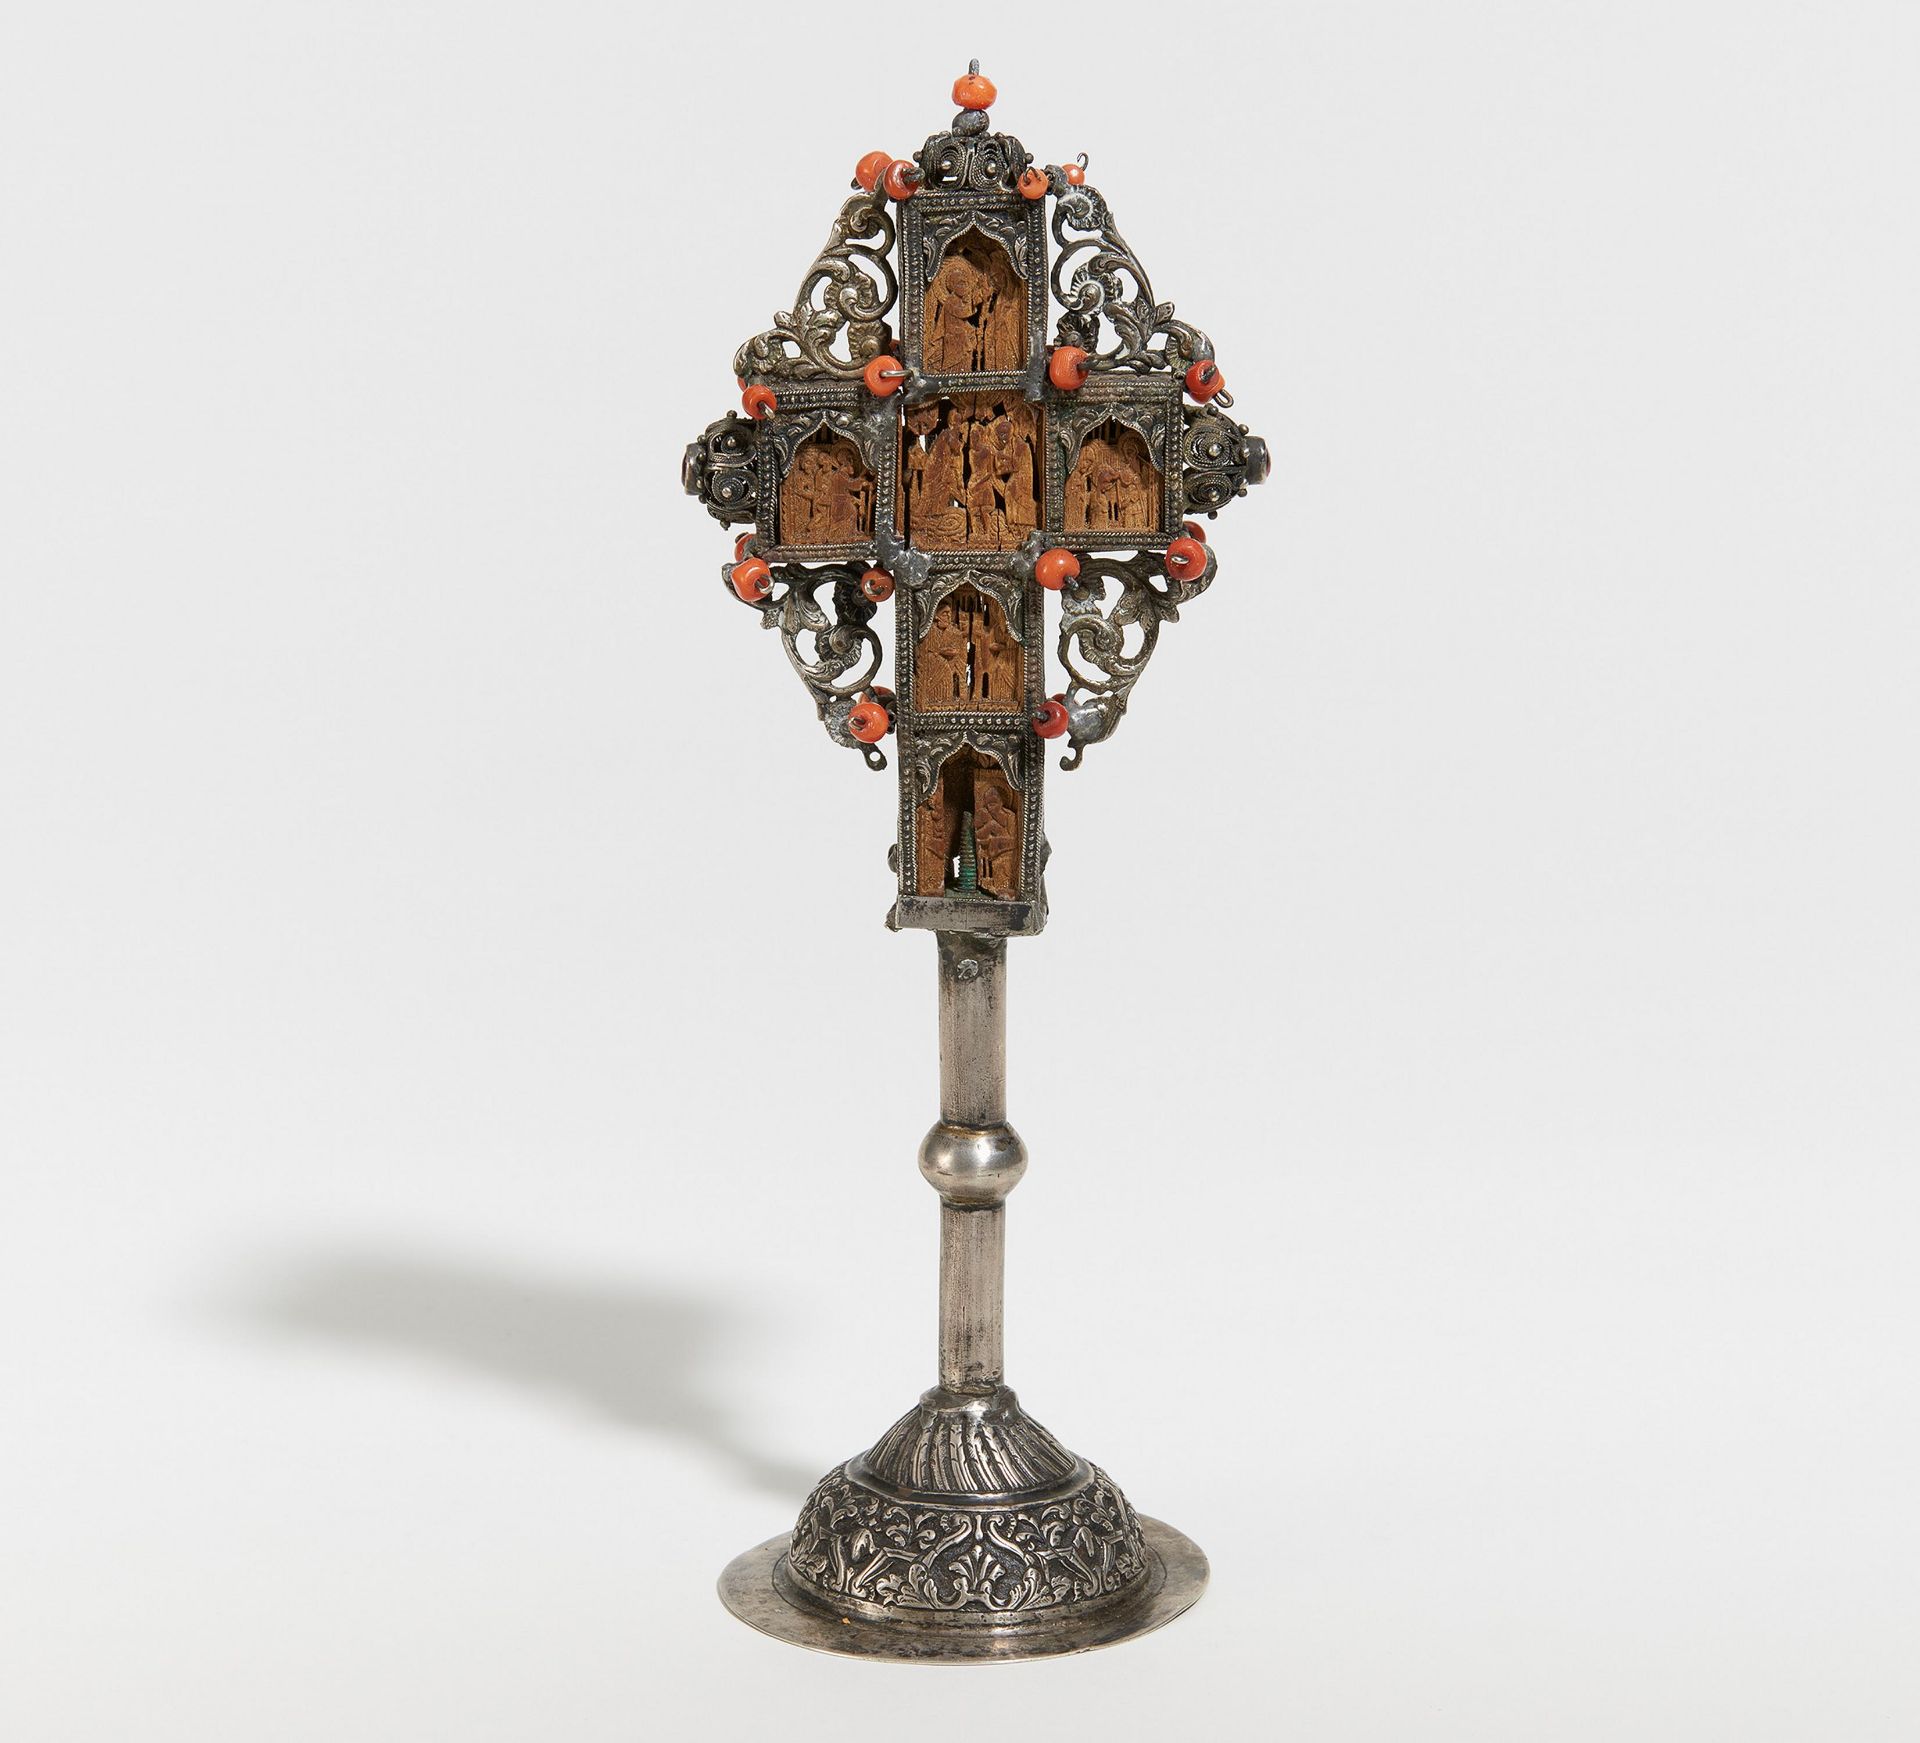 SMALL TABLE CROSS MADE OF SILVER, CORAL AND CEDAR WOOD. Mount Athos. Date: 18th century. - Bild 4 aus 5